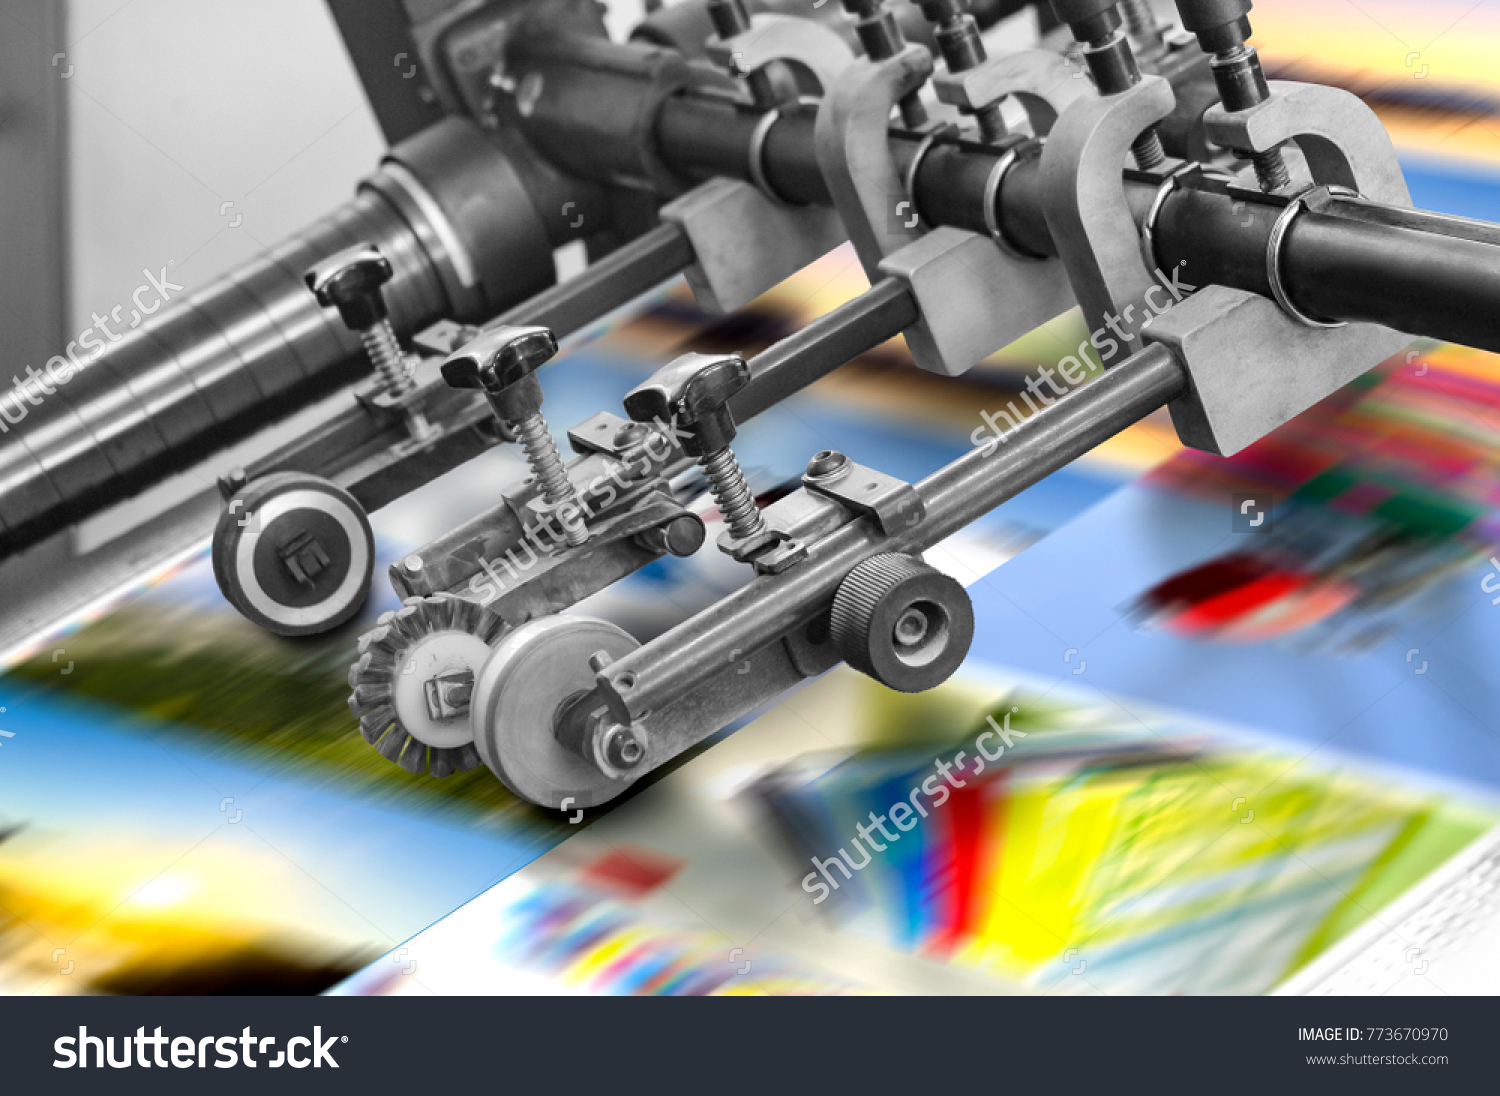 Printing at high speed on offset machine. Label, Rolled Up, Printing Out, Group of Objects, Merchandise #773670970